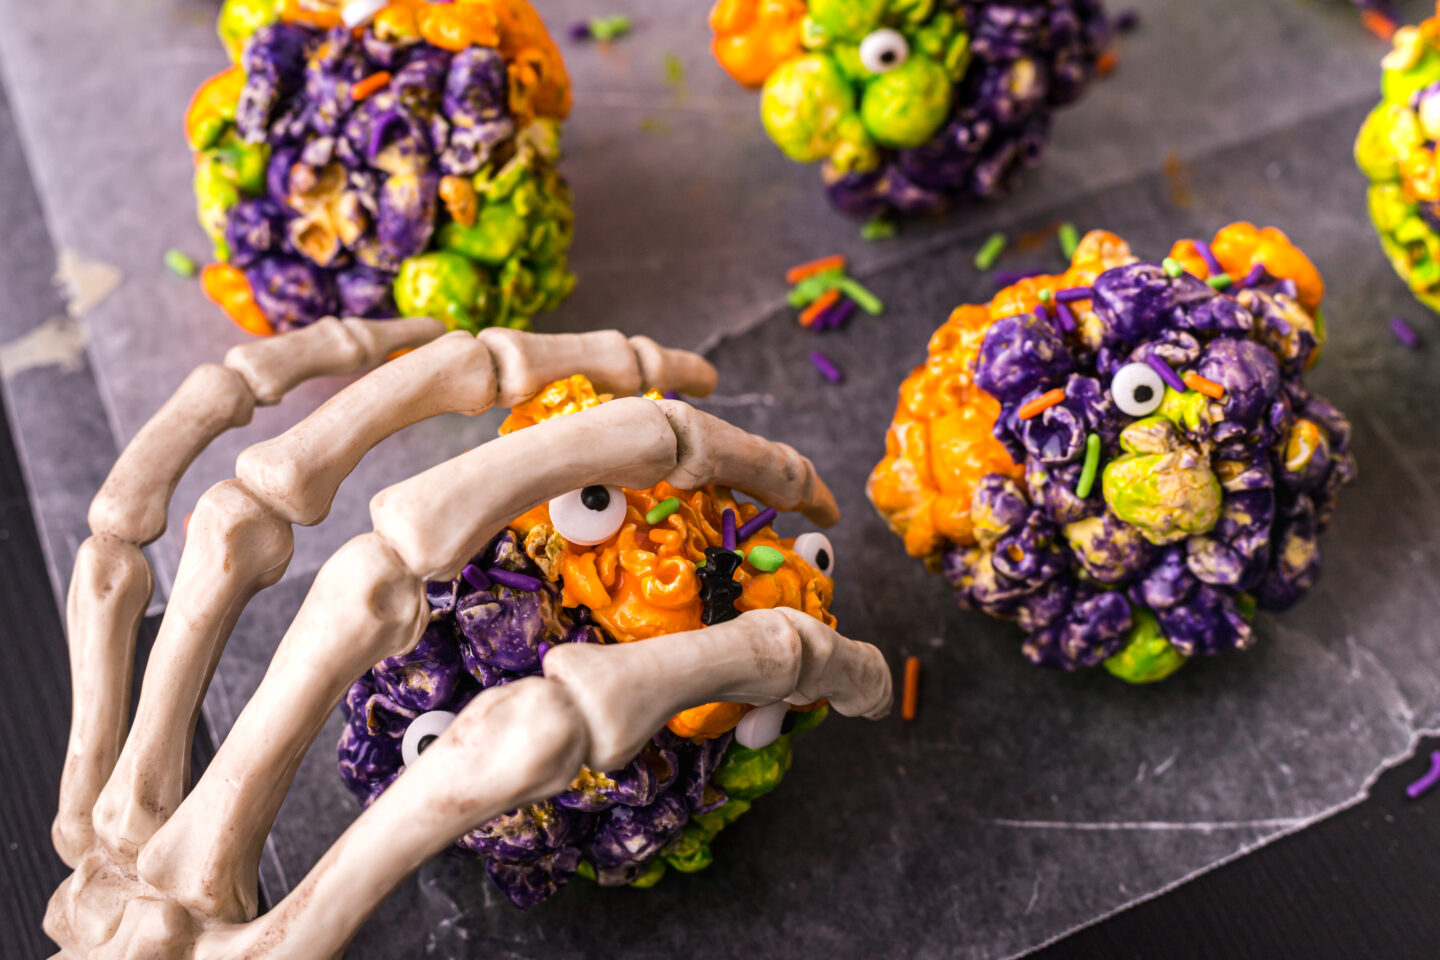 A plastic skeleton hand reaching out to grab the Halloween salty treats 